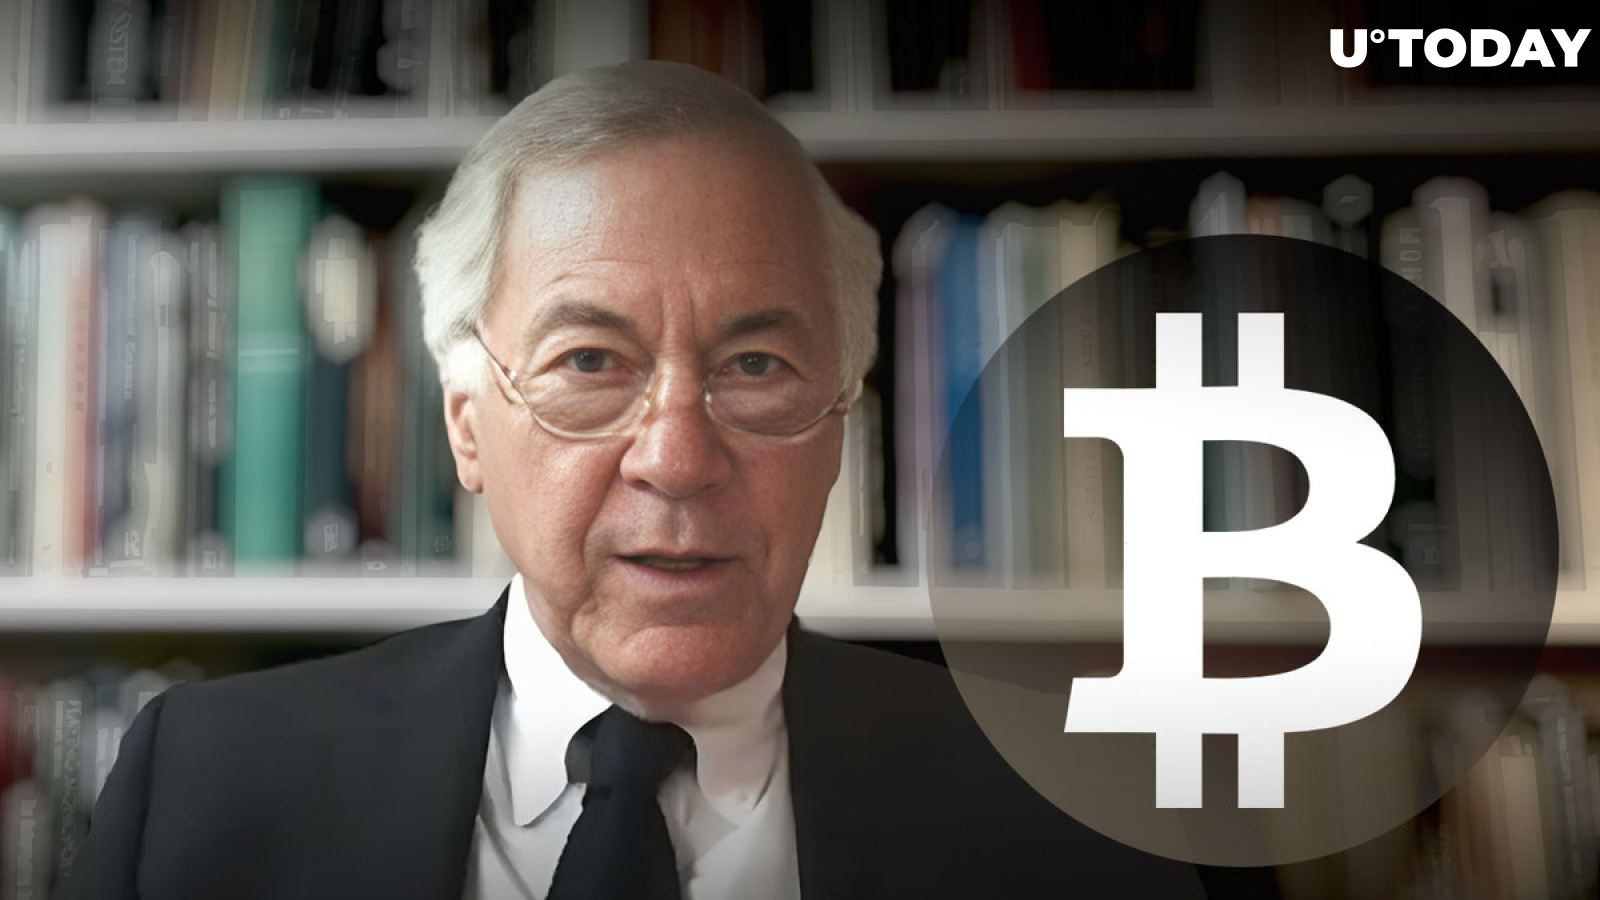 Major Economist Steve Hanke Uses This Emoji to Explain Why BTC Is No Currency